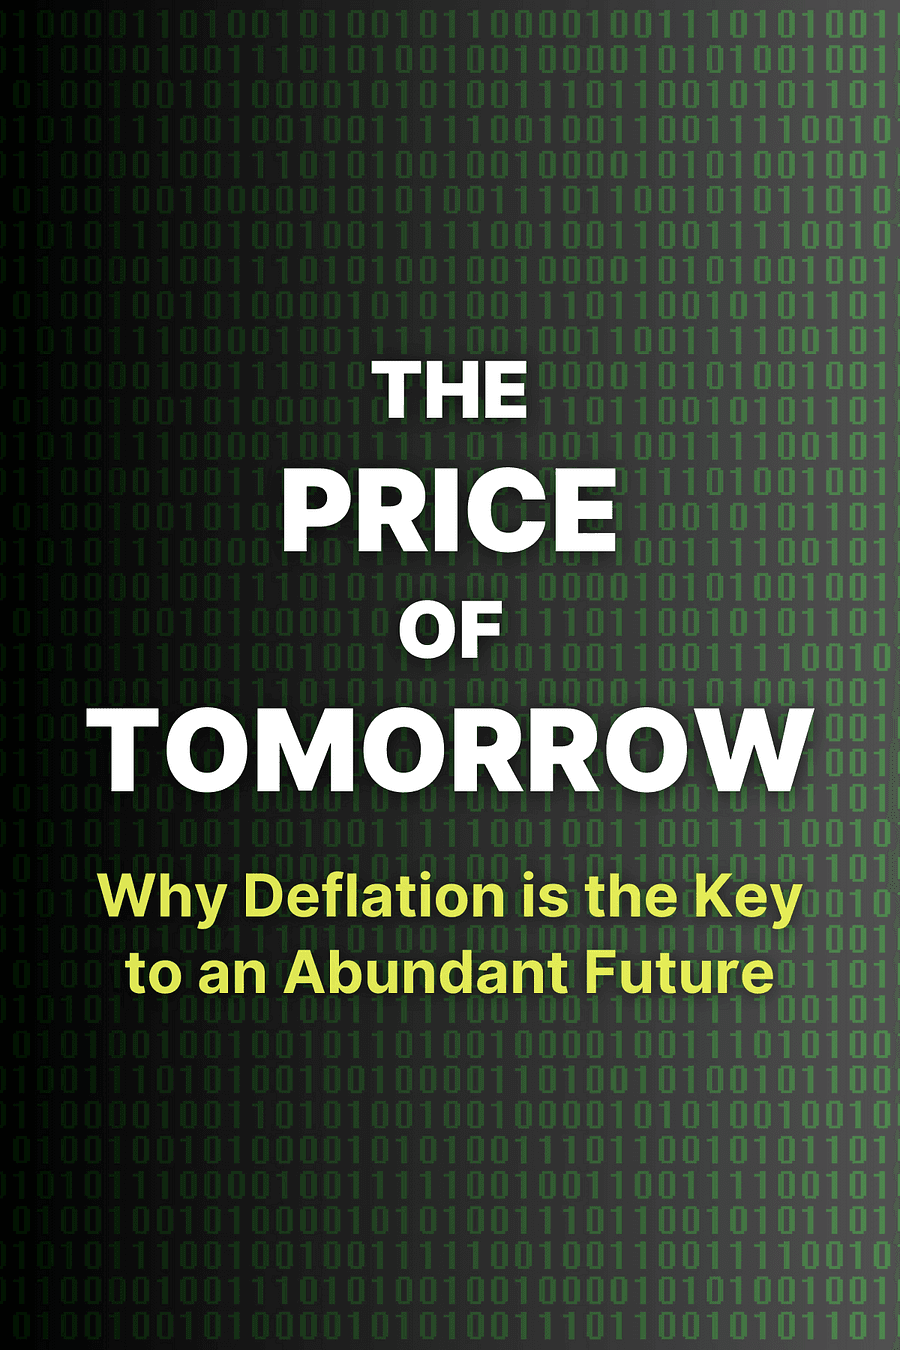 The Price of Tomorrow by Jeff Booth - Book Summary